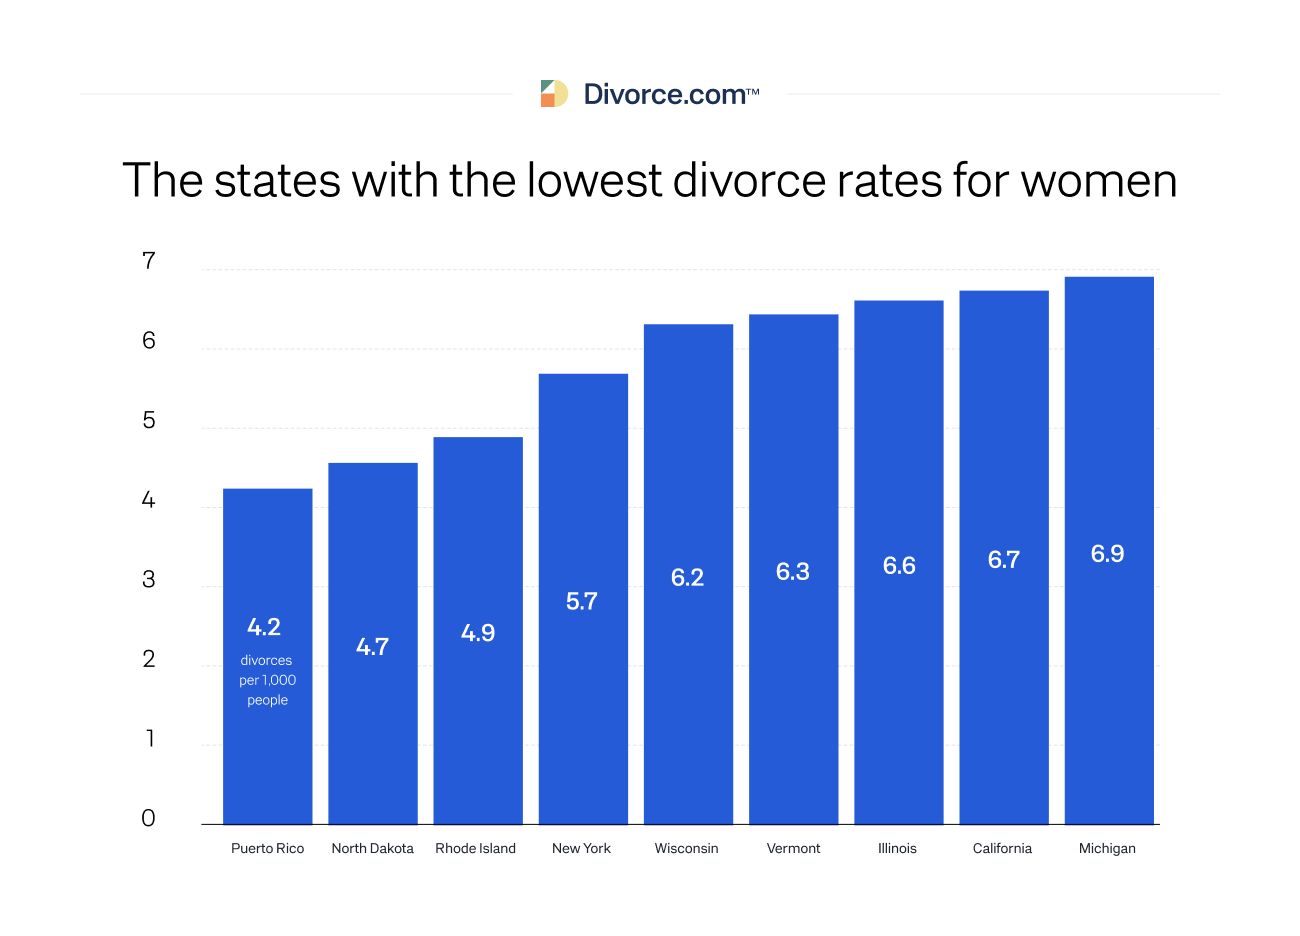 These are the states with the lowest divorce rates for women